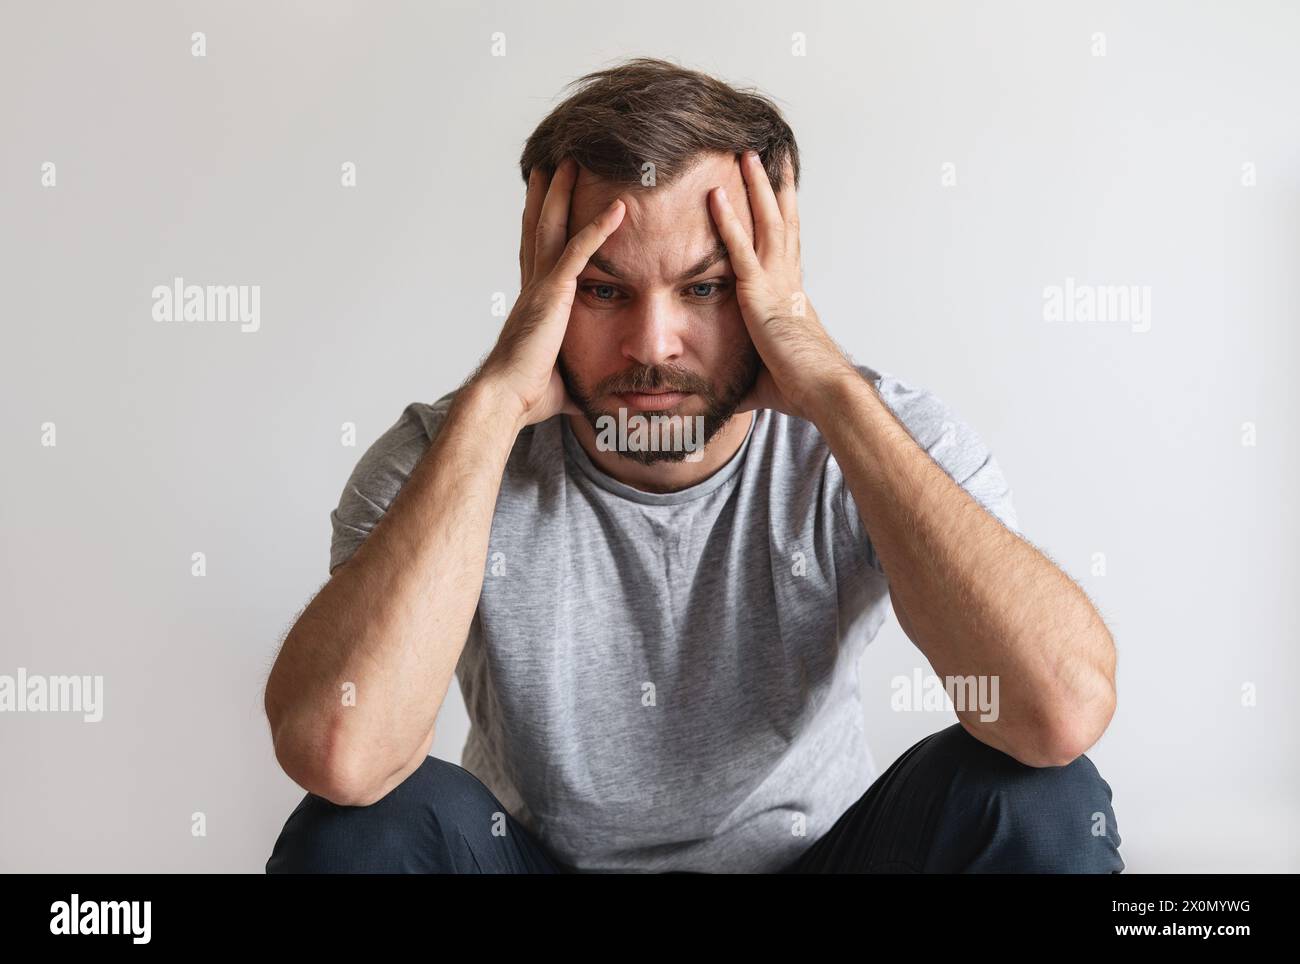 Male mental illness concept. Tired unhappy man holds head with hands. Melancholy and downcast person. Stock Photo